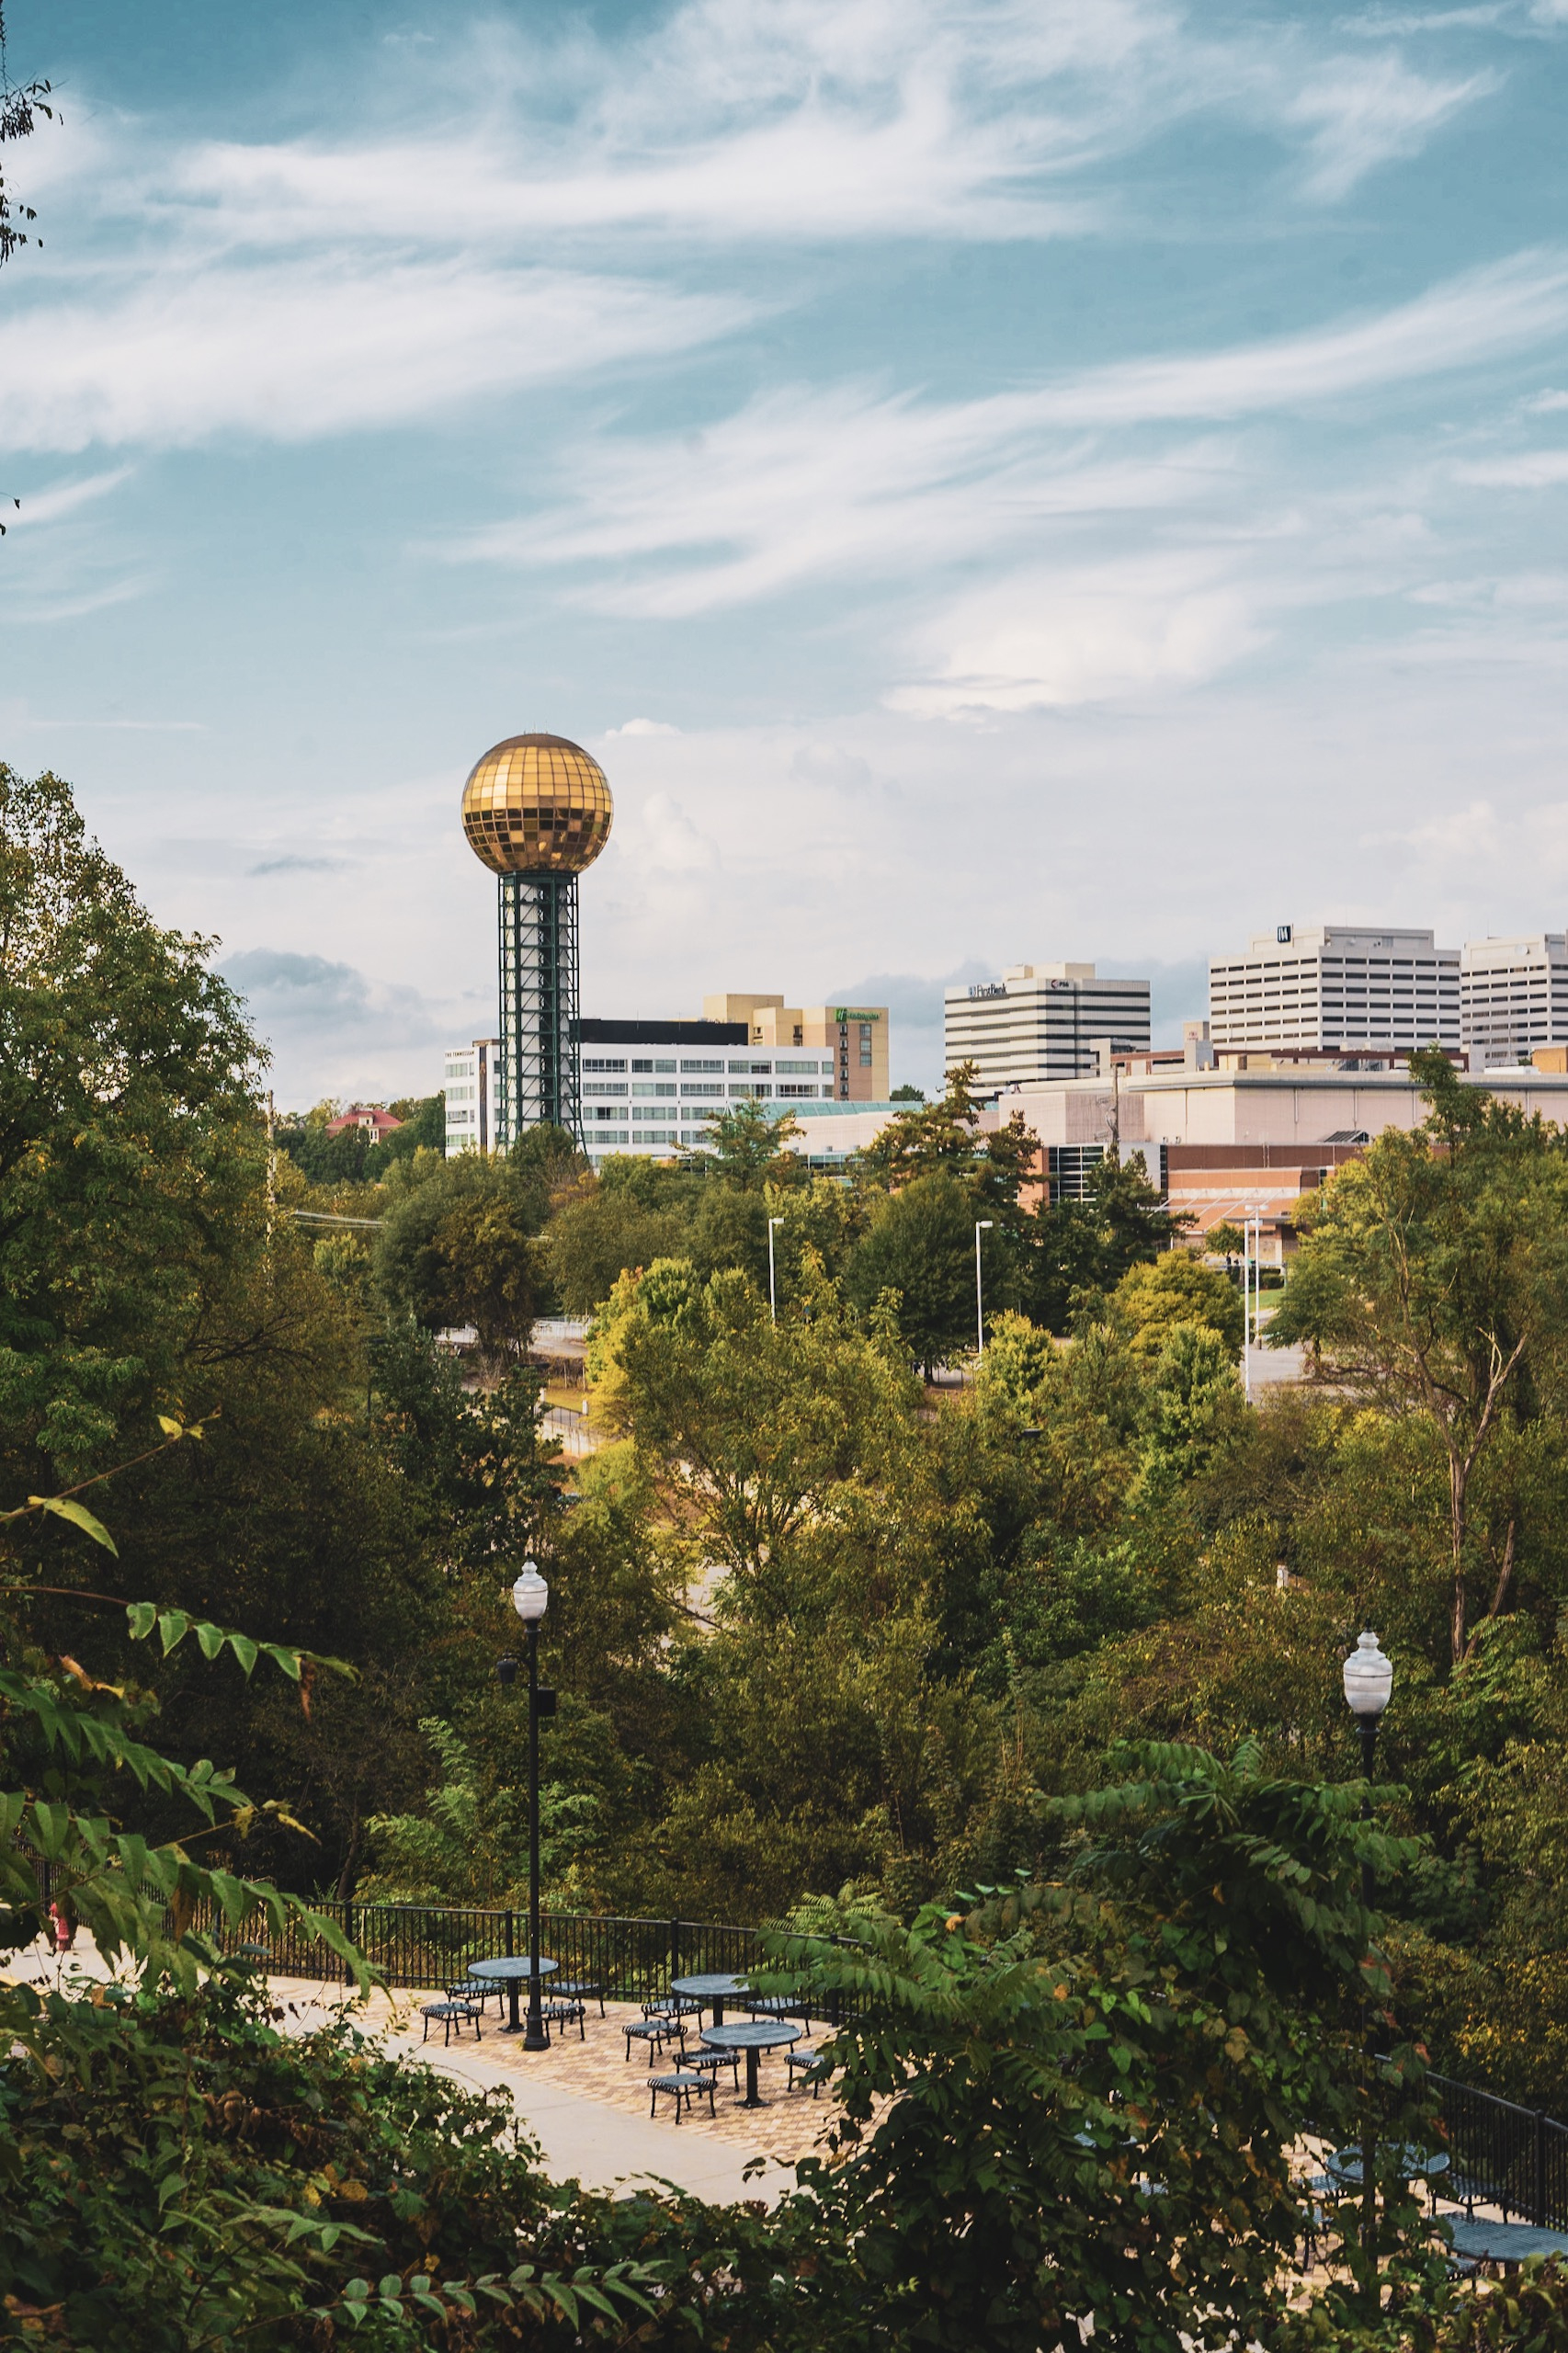 A unique view of the Sunsphere in Knoxville, TN